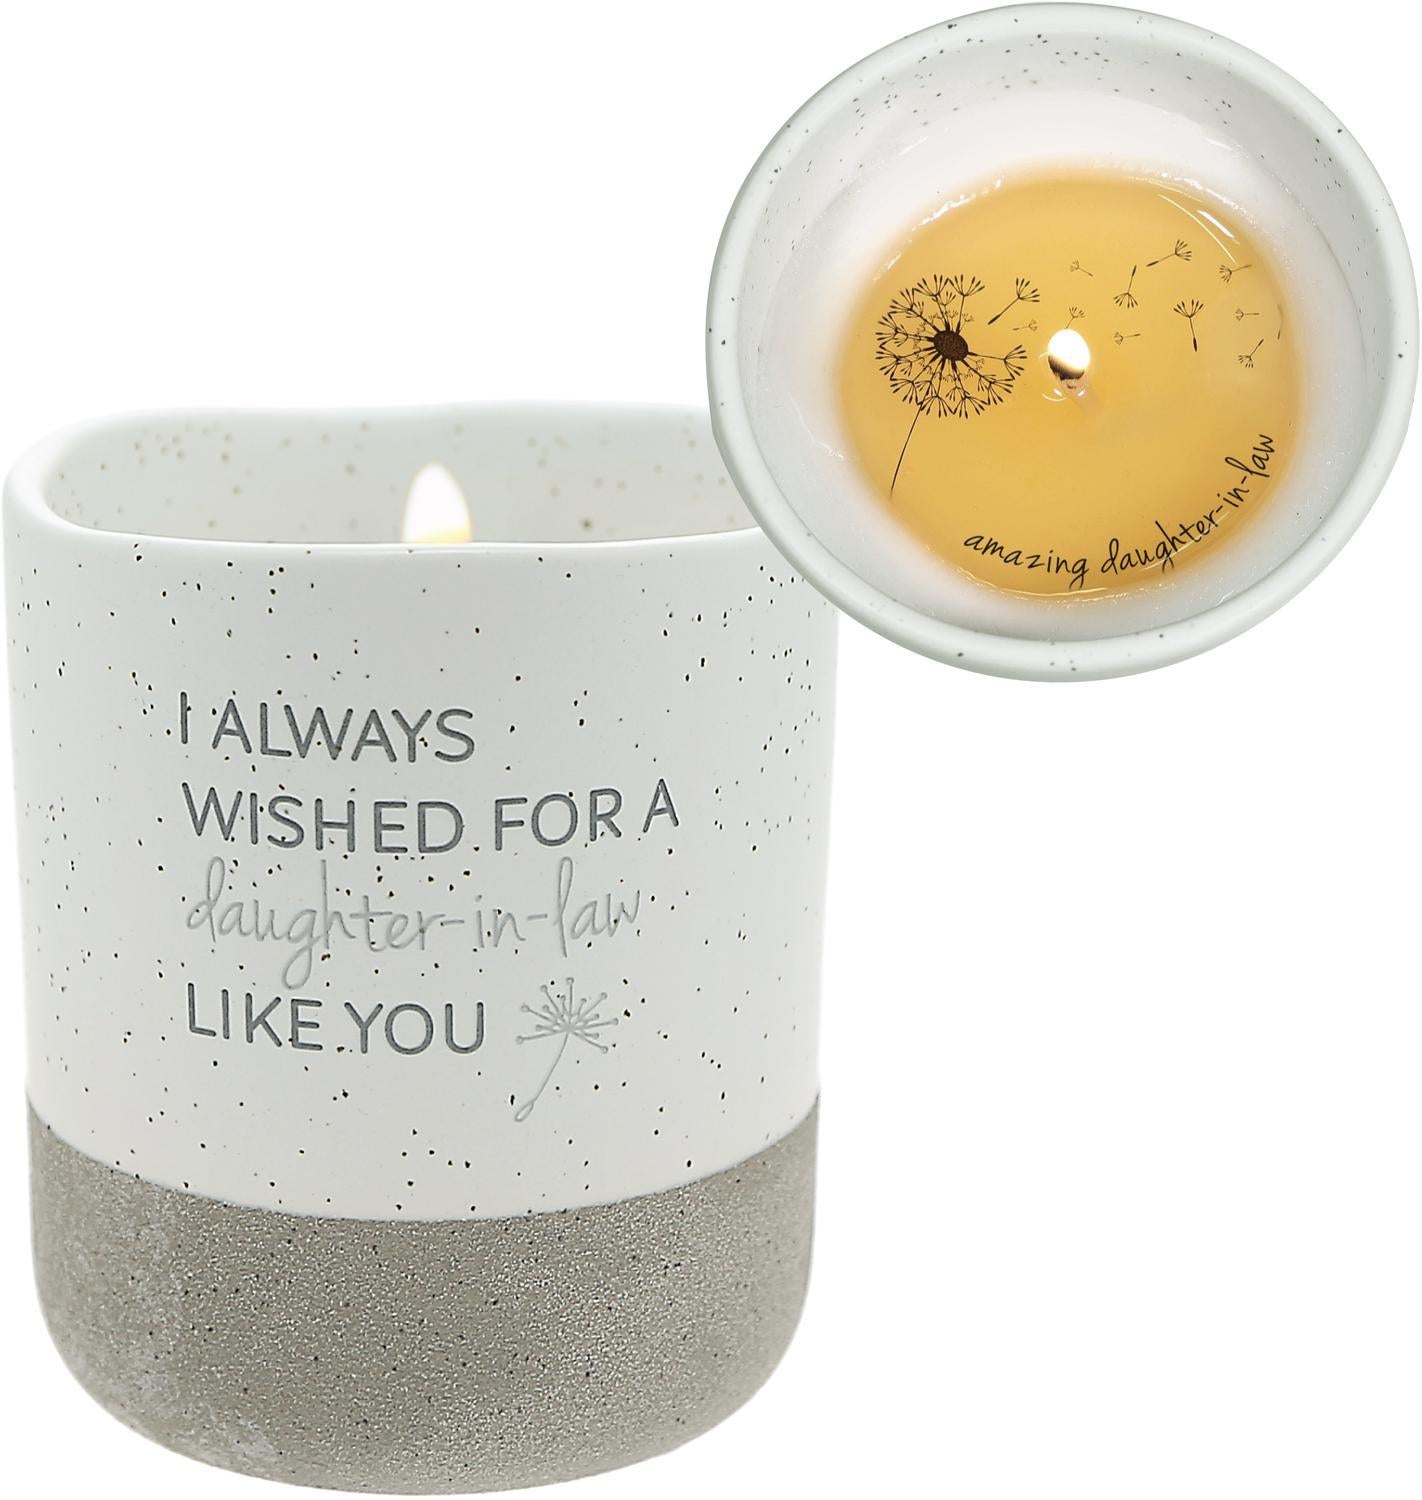 Daughter-In-Law Like You - 10 oz - 100% Soy Wax Reveal Candle Scent: Tranquility